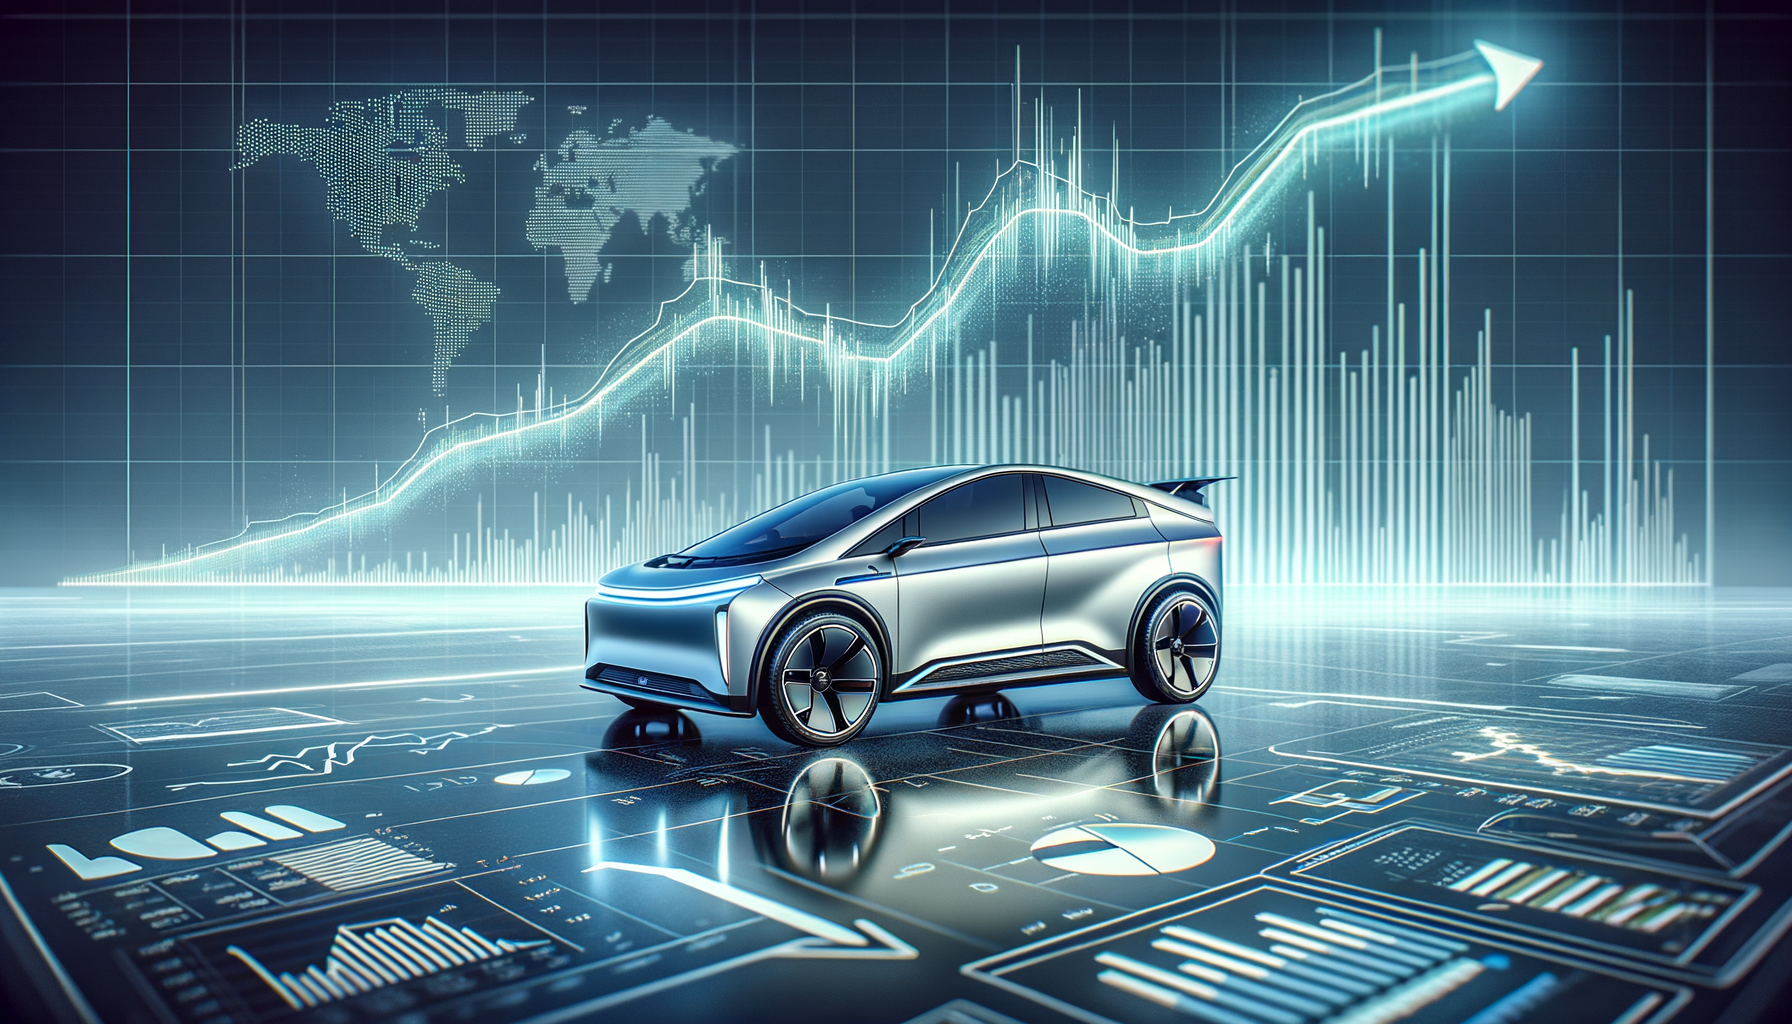 NIO Inc. Faces Technical and Fundamental Challenges, Evaluation Suggests Hold